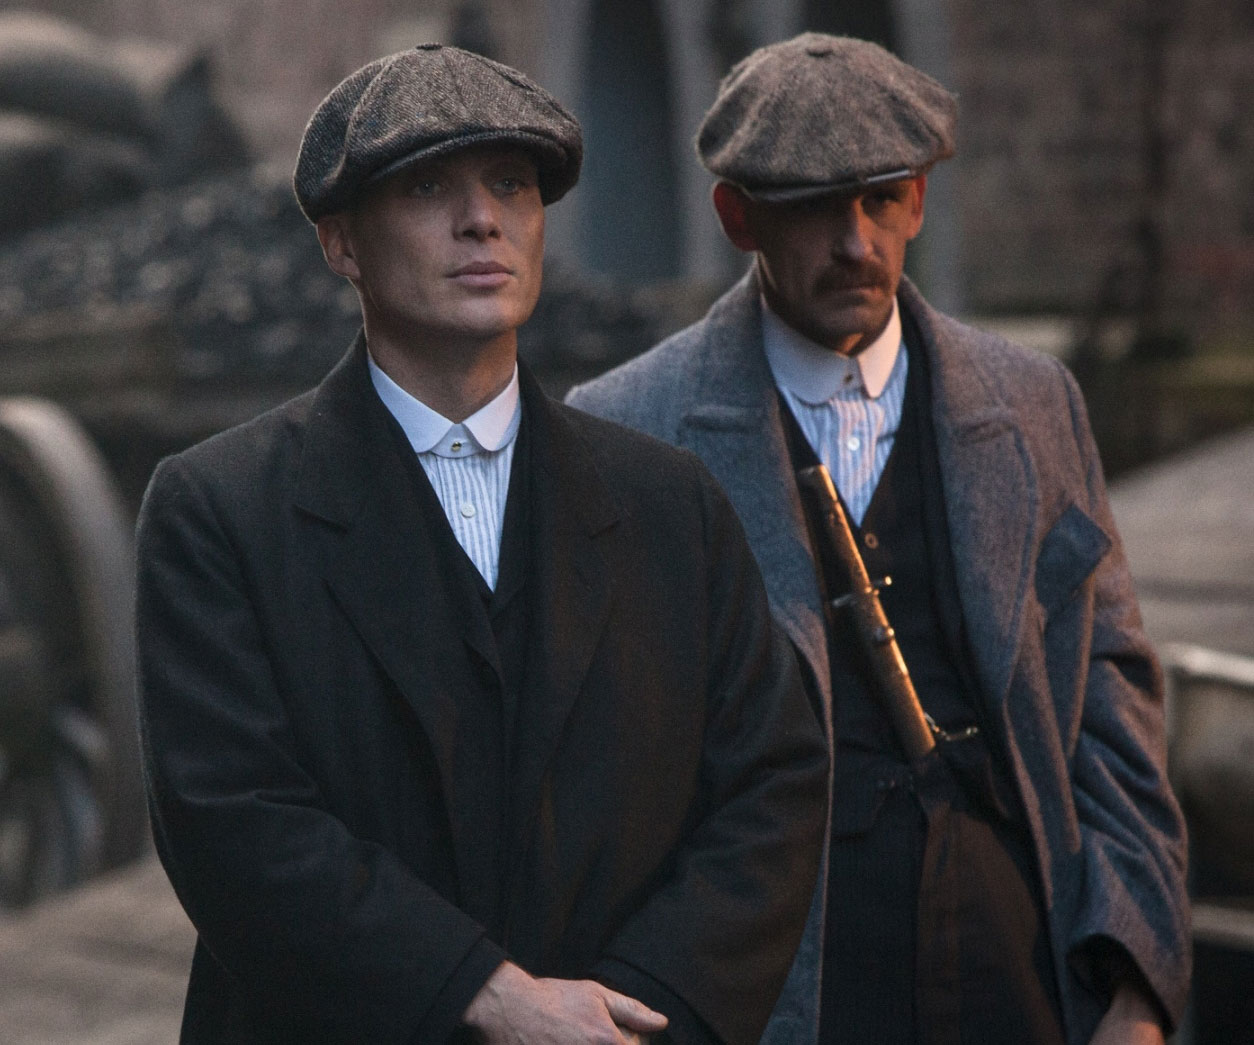 Peaky Blinders and The Resident to be renewed for more seasons